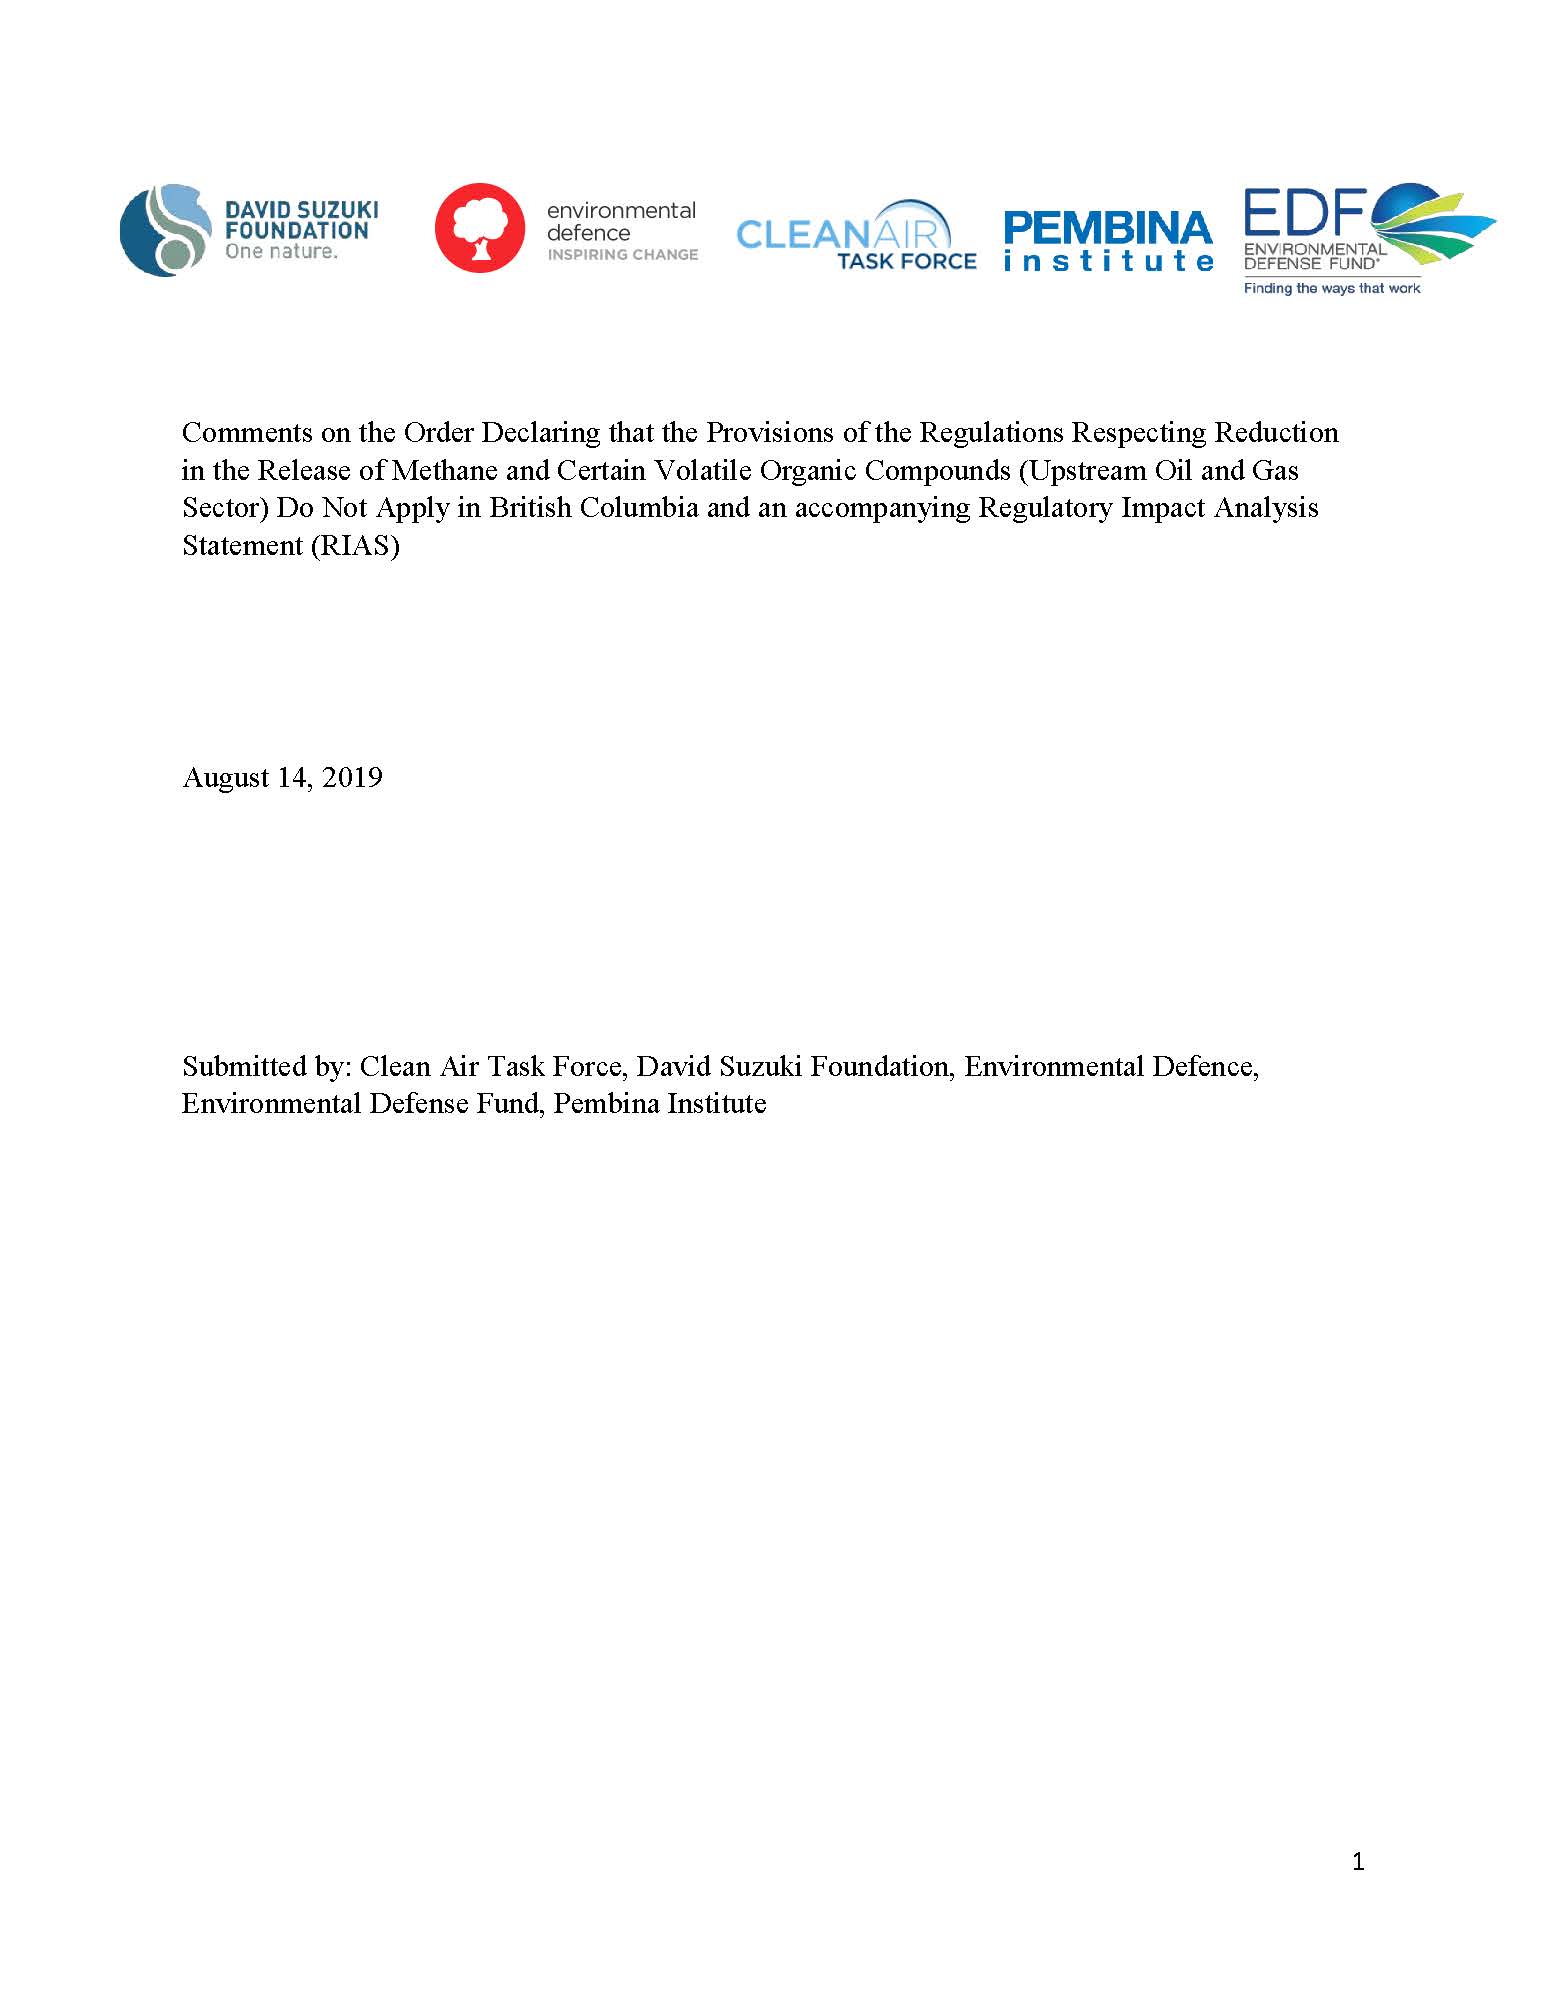 Cover of NGO comments on proposed methane equivalency agreement with BC